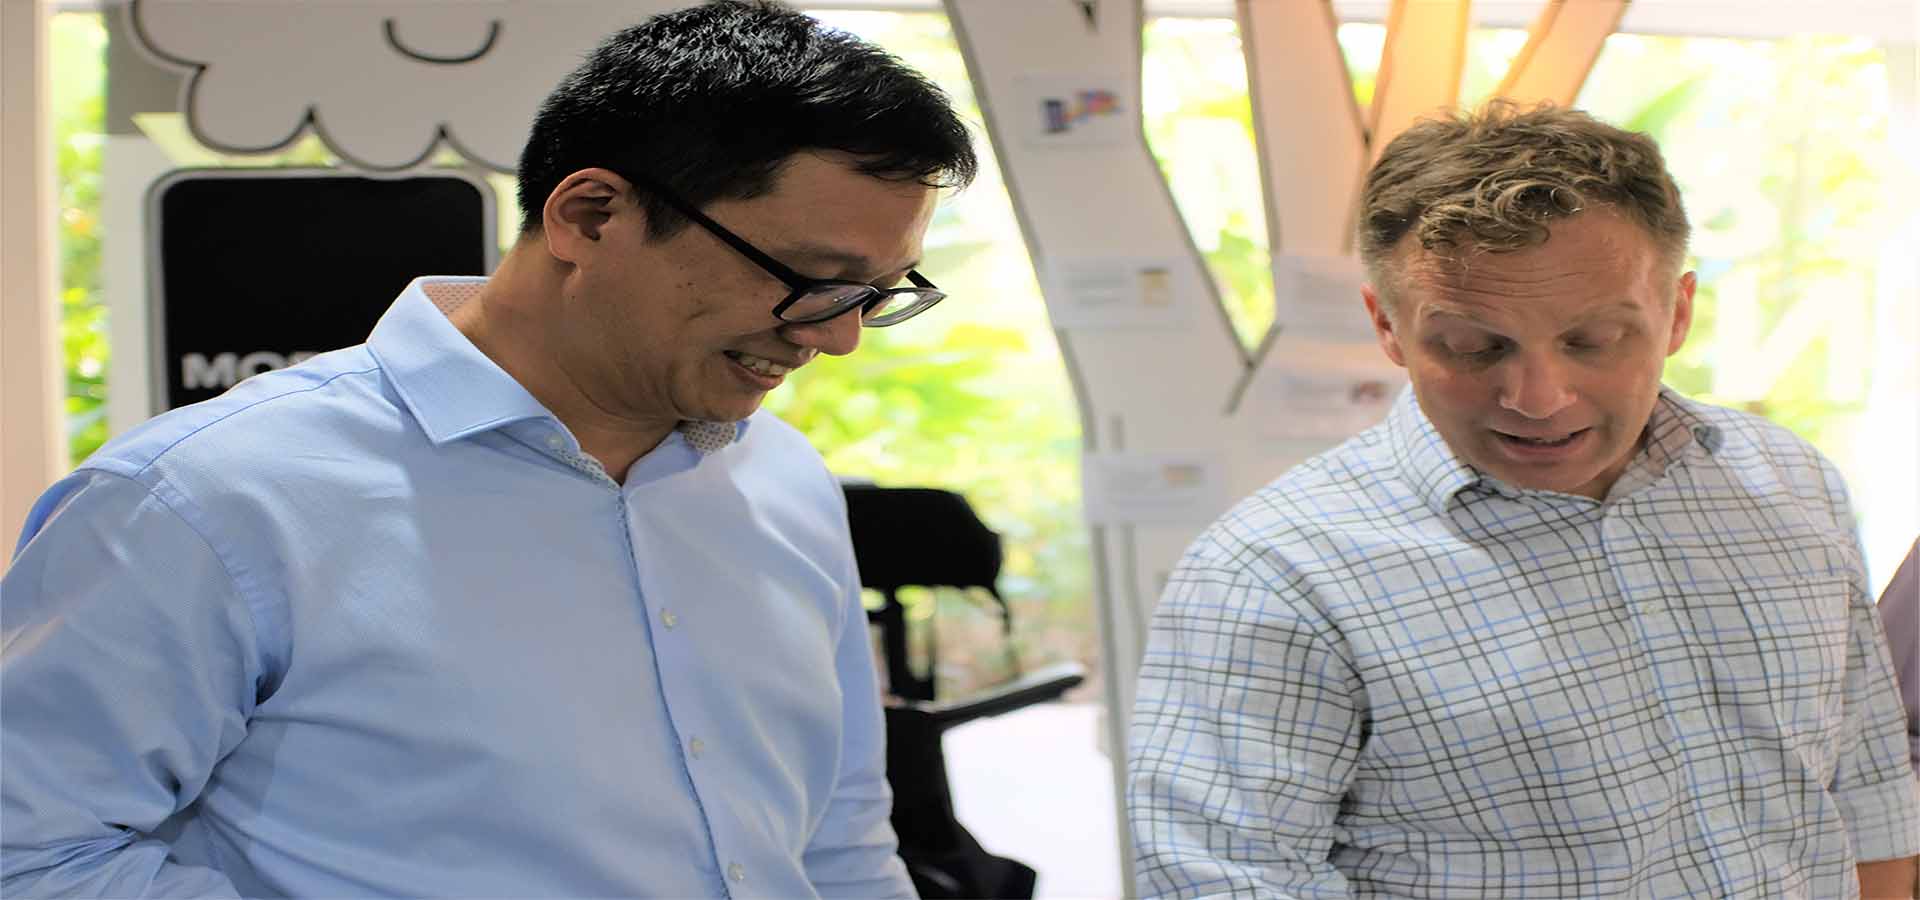 Justin Spelhaug (right) and Ng Herk Low, Assistant Chief Executive of SG Enable, at the Enabling Village in Singapore. Photo: Geoff Spencer